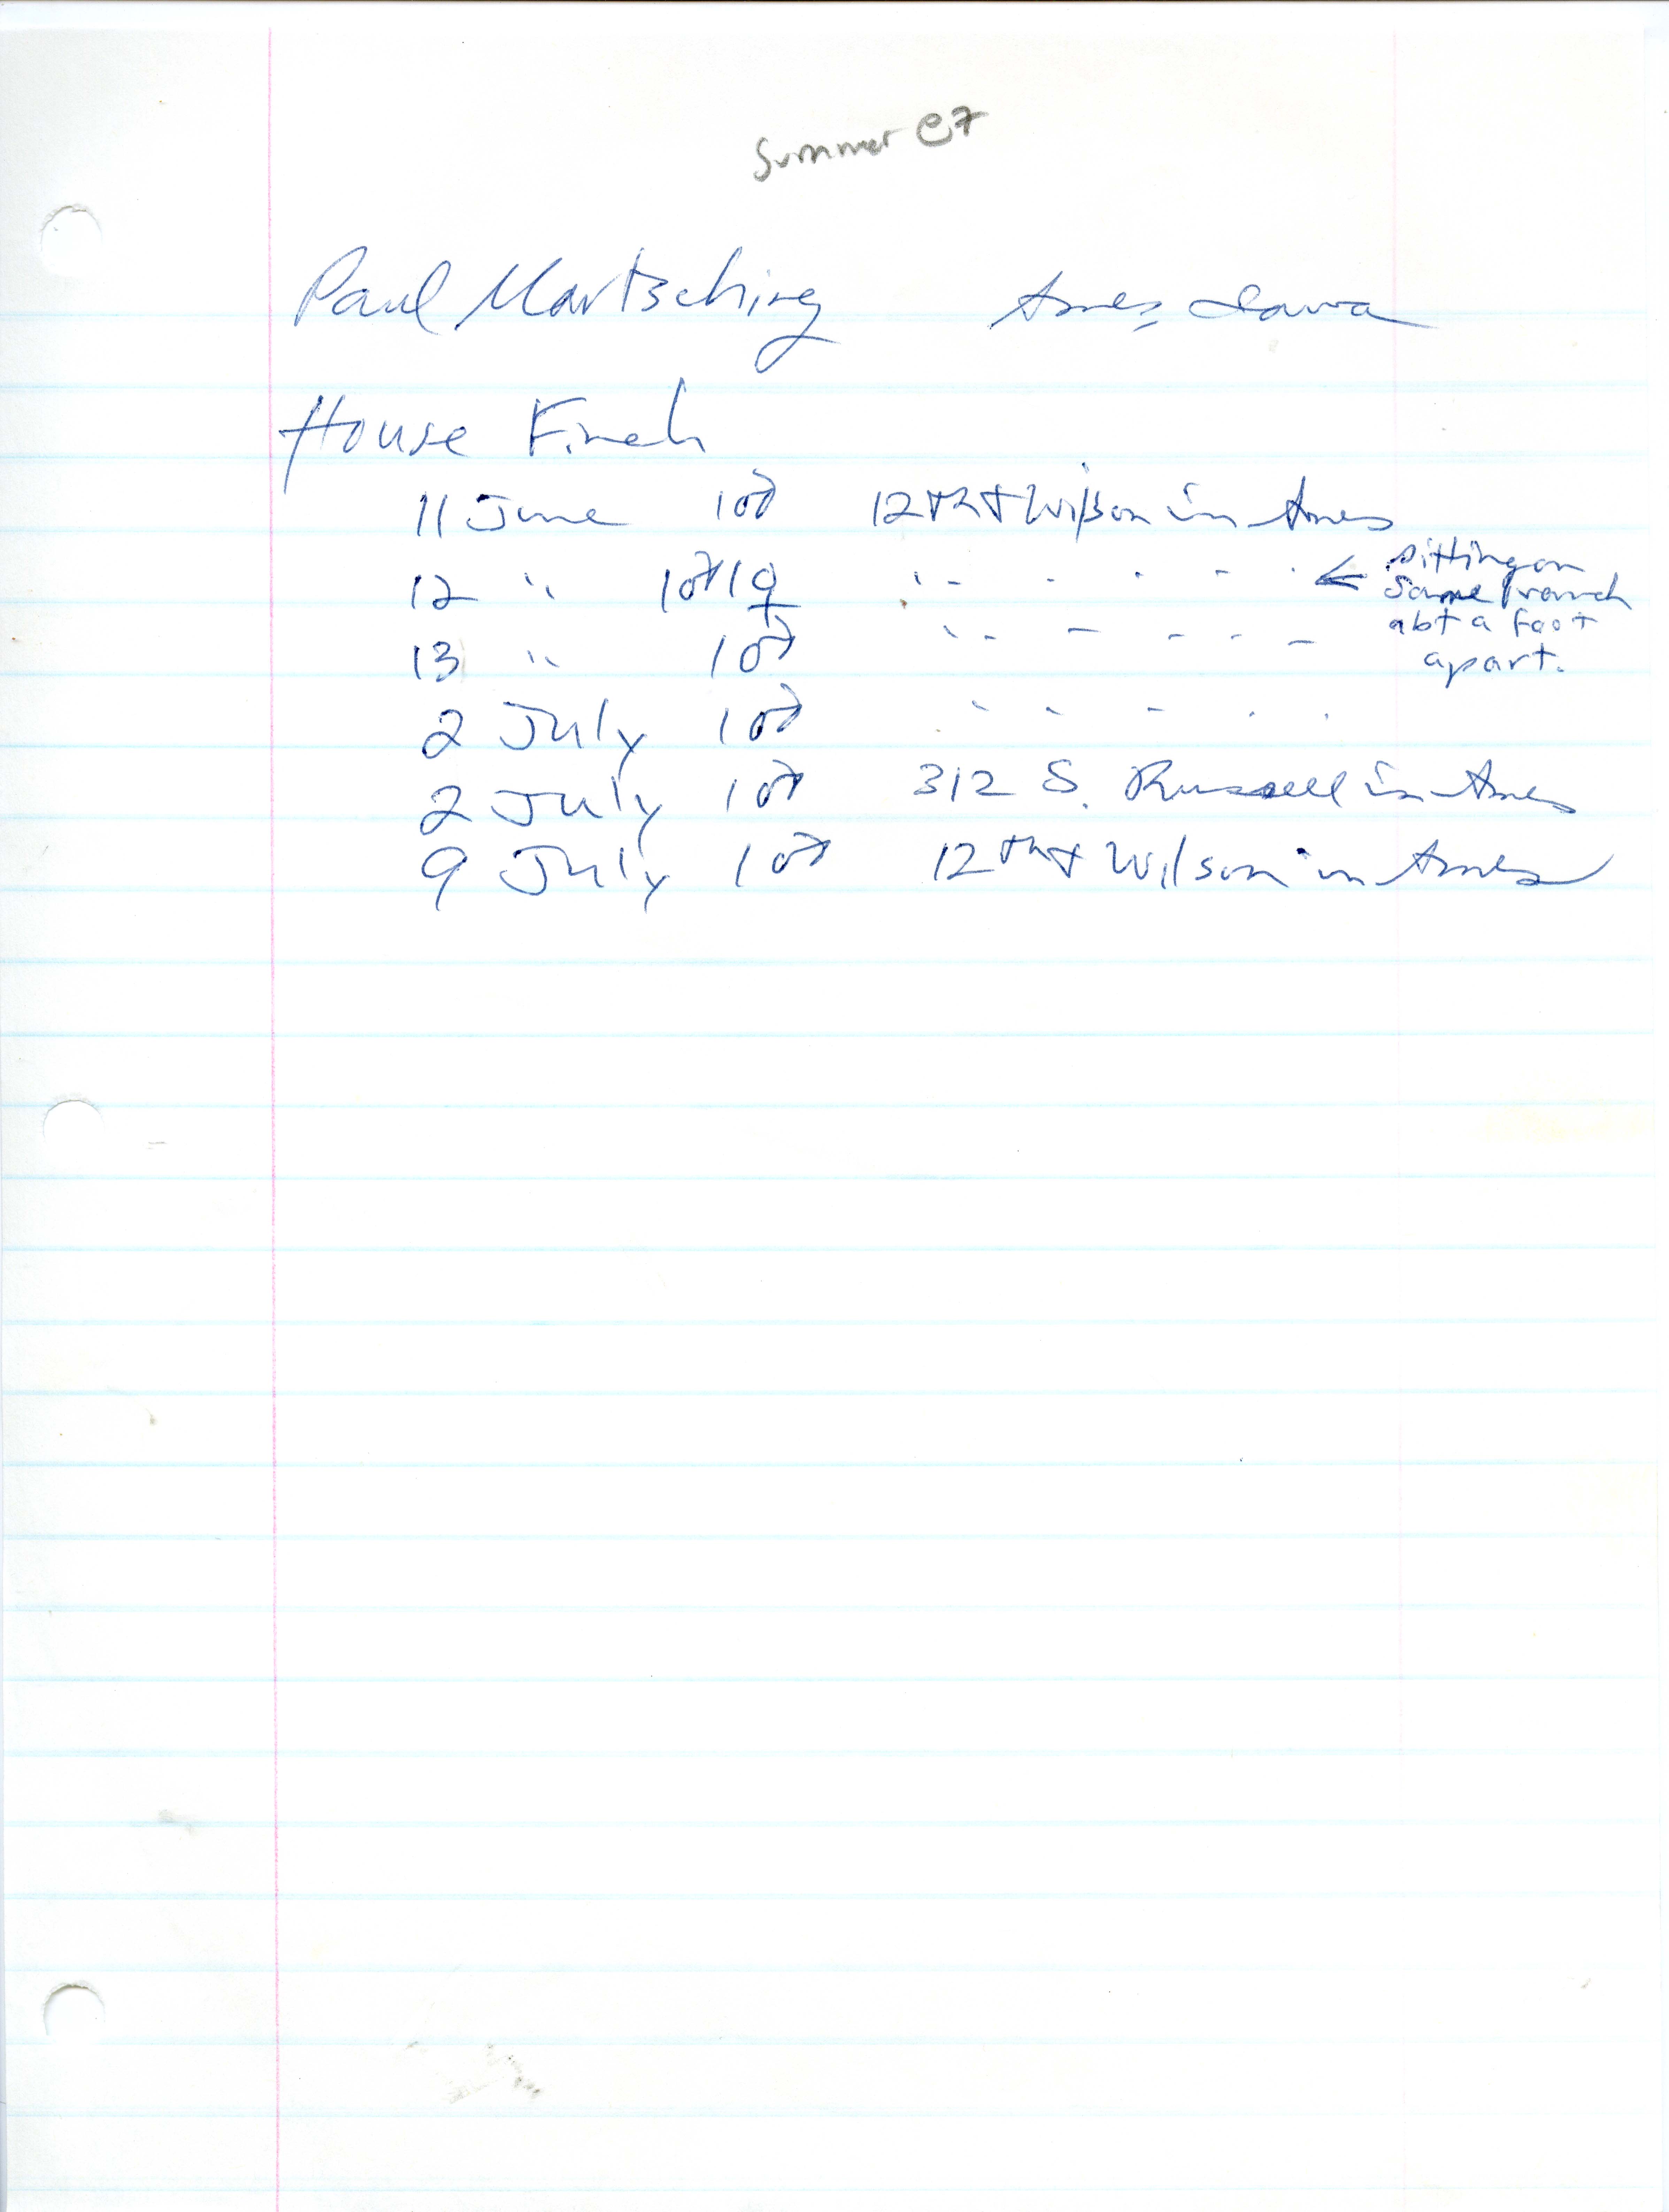 Field notes contributed by Paul Martsching, summer 1987